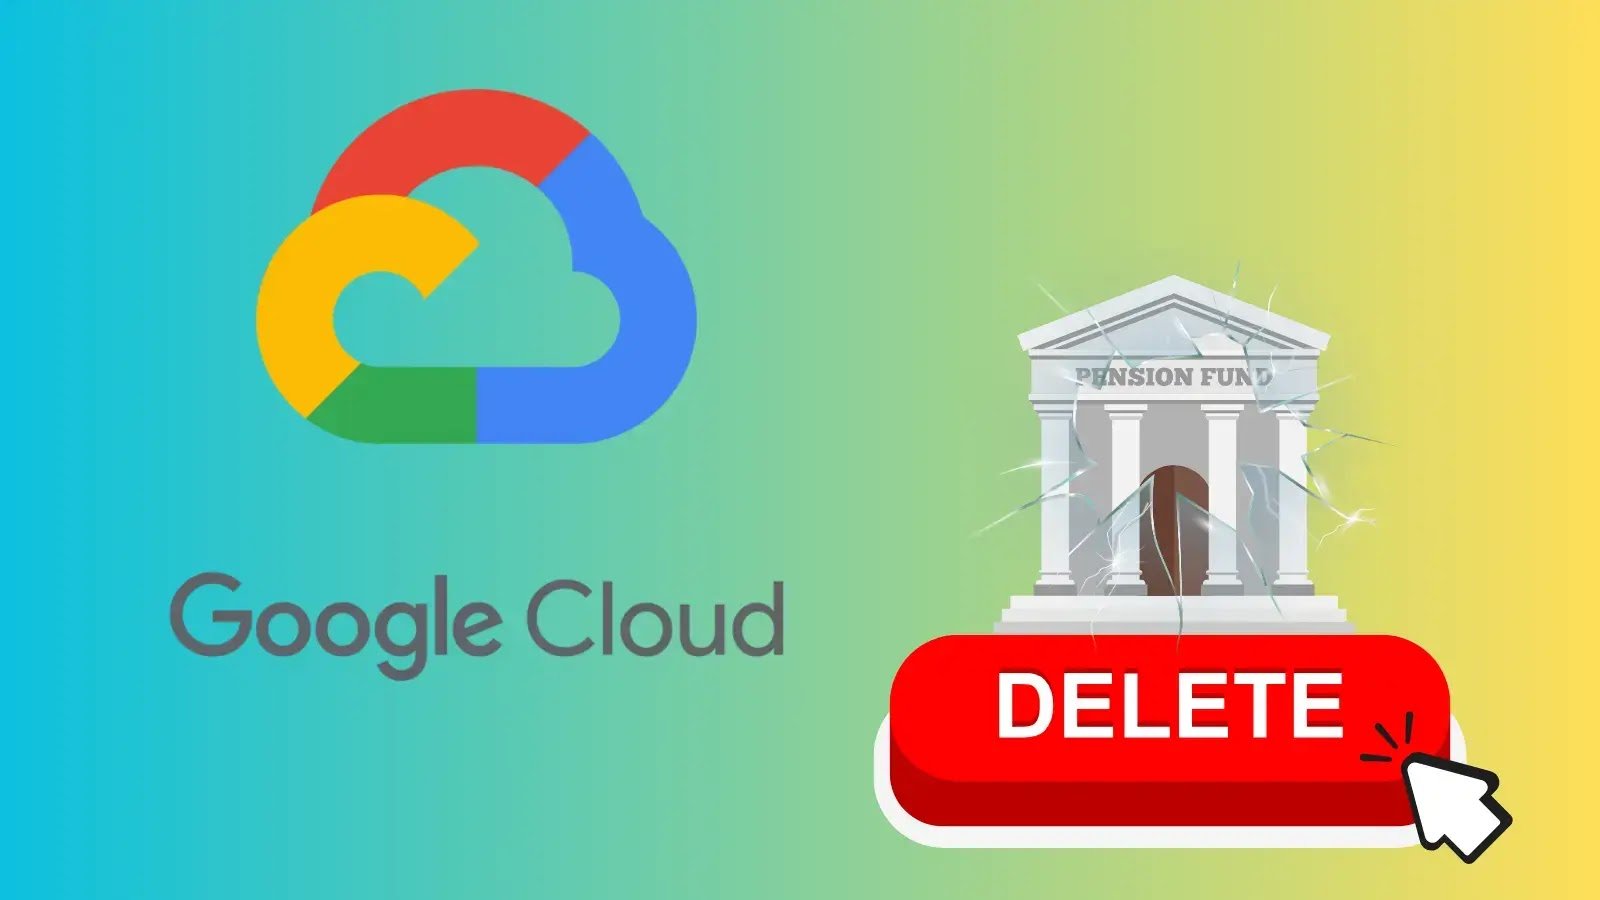 Google Cloud accidentally Deletes 125 billion Pension Fund’s Online Account